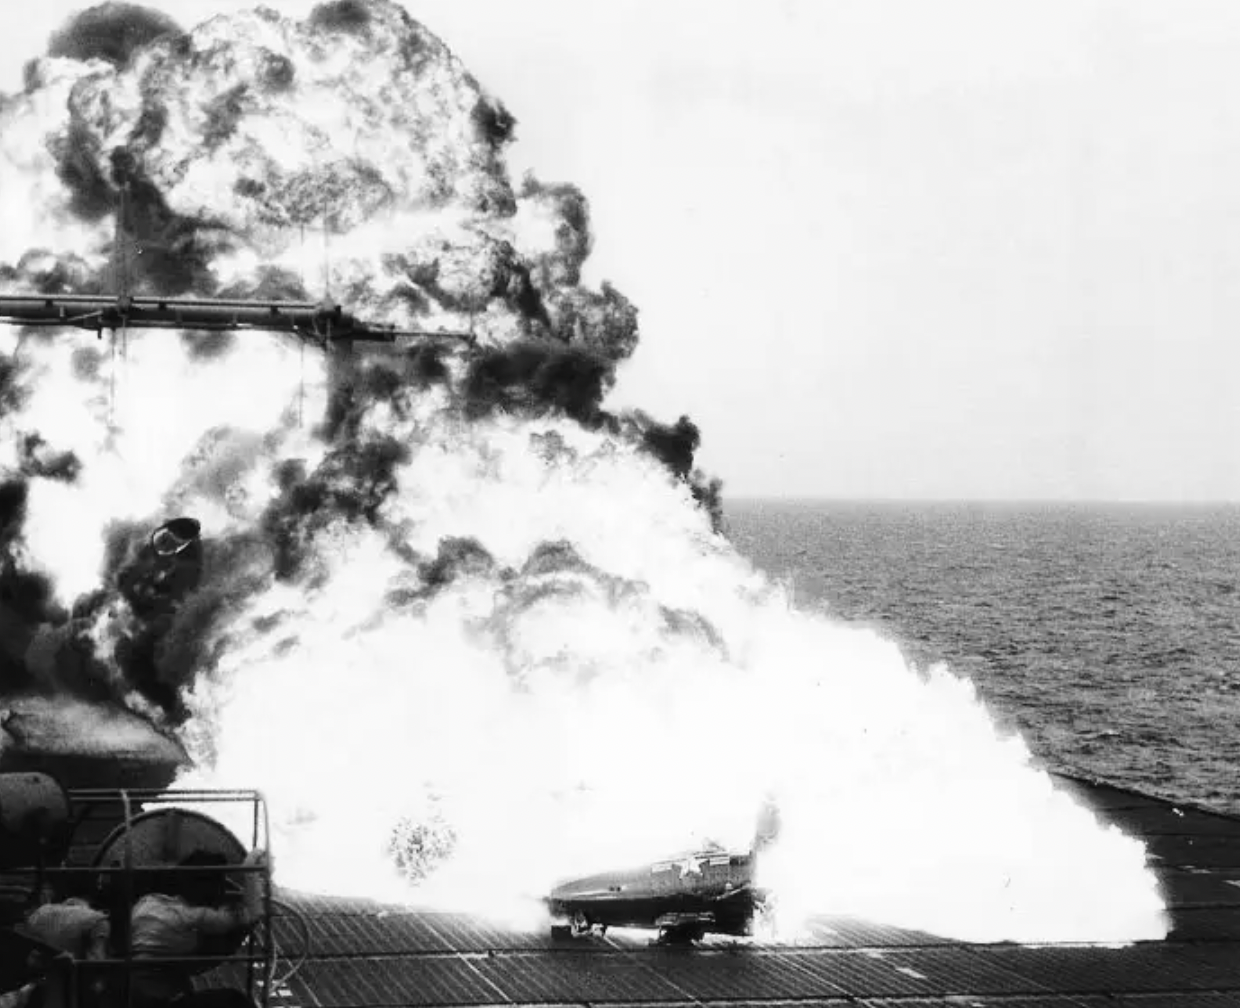 A well-known carrier accident of the 1950s: here, the F9F-5 Panther pilot <a href="https://www.thedrive.com/the-war-zone/41251/the-most-replayed-carrier-crash-in-history-happened-70-years-ago-today">survived a ramp strike</a> and the fiery destruction of his aircraft.